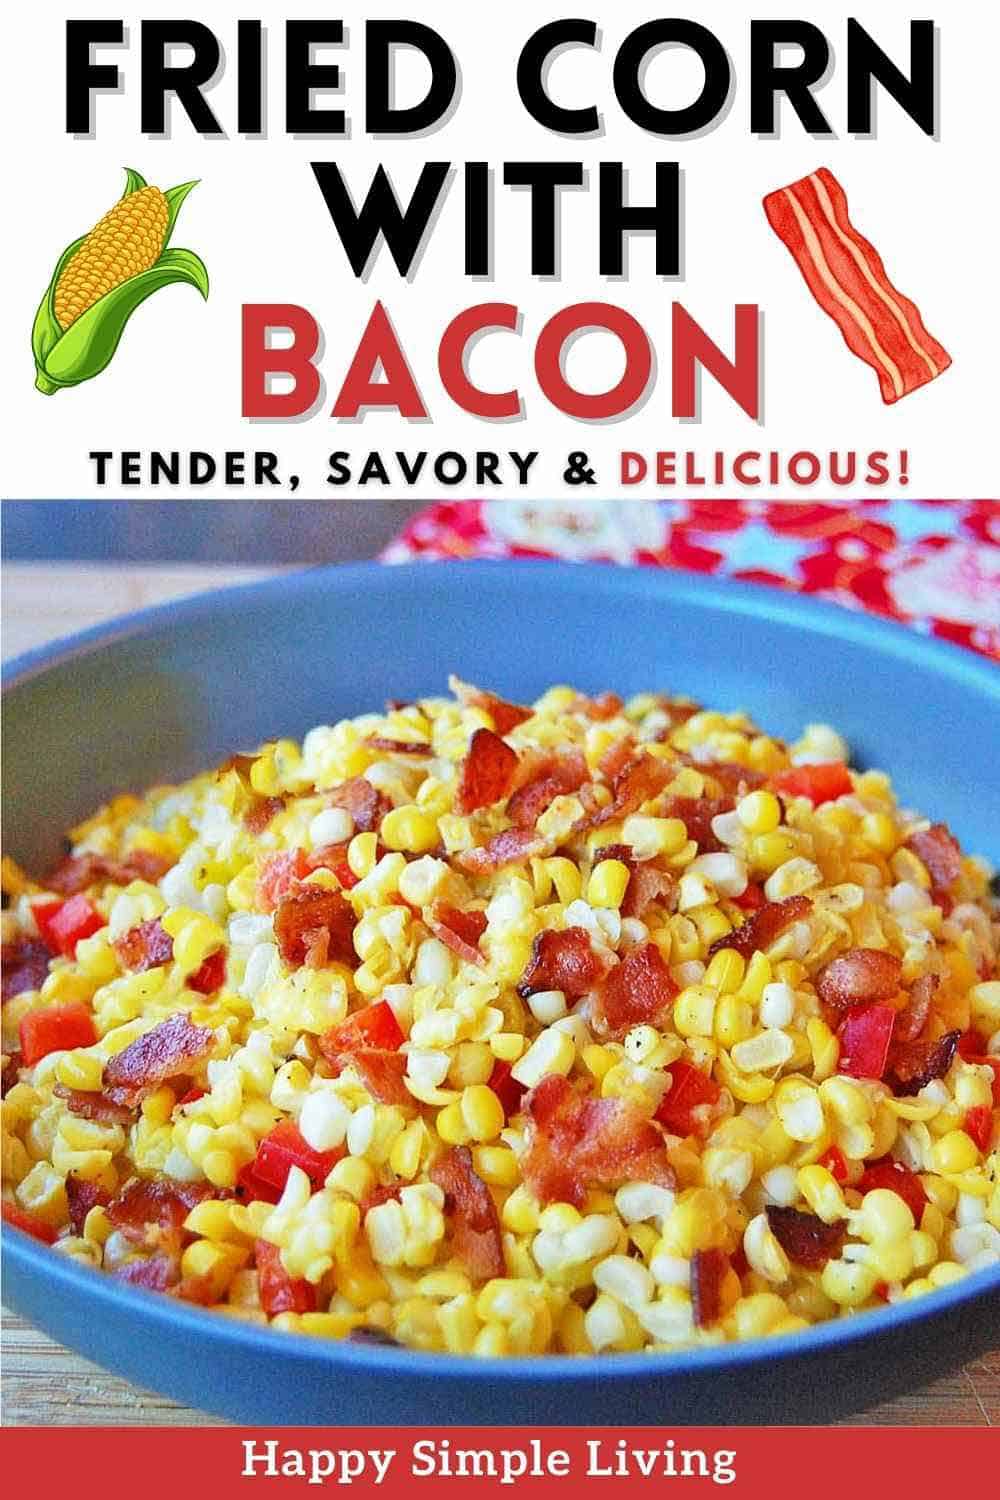 A large skillet filled with cooked Southern fried corn with bacon and chopped red bell peppers.